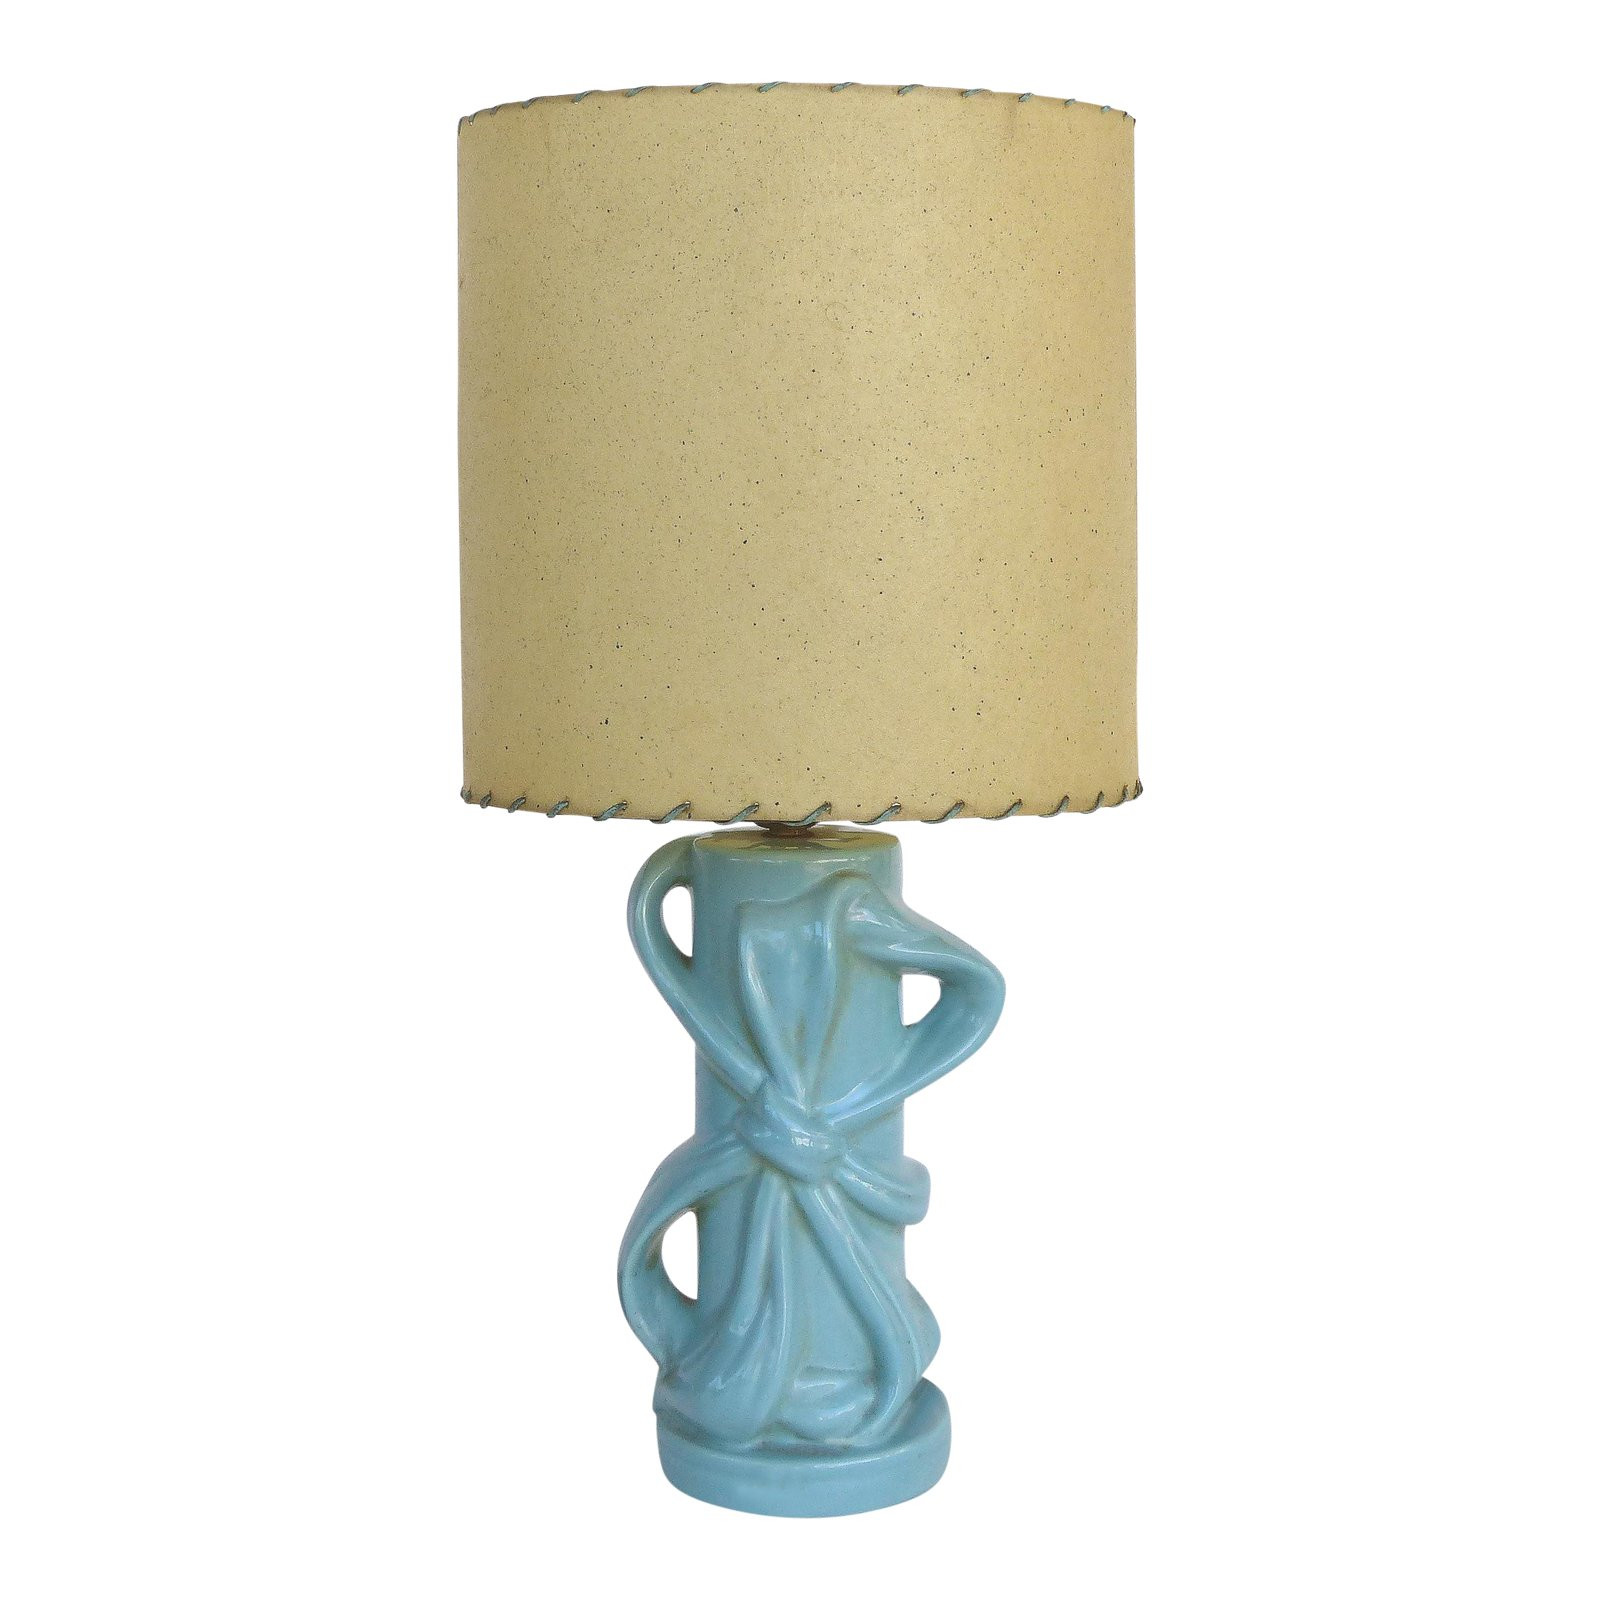 12 Fabulous Ceramic Vase Table Lamps 2024 free download ceramic vase table lamps of mid century modern glazed ceramic table lamp w a laced shade chairish within mid century modern glazed ceramic table lamp w a laced shade 8913